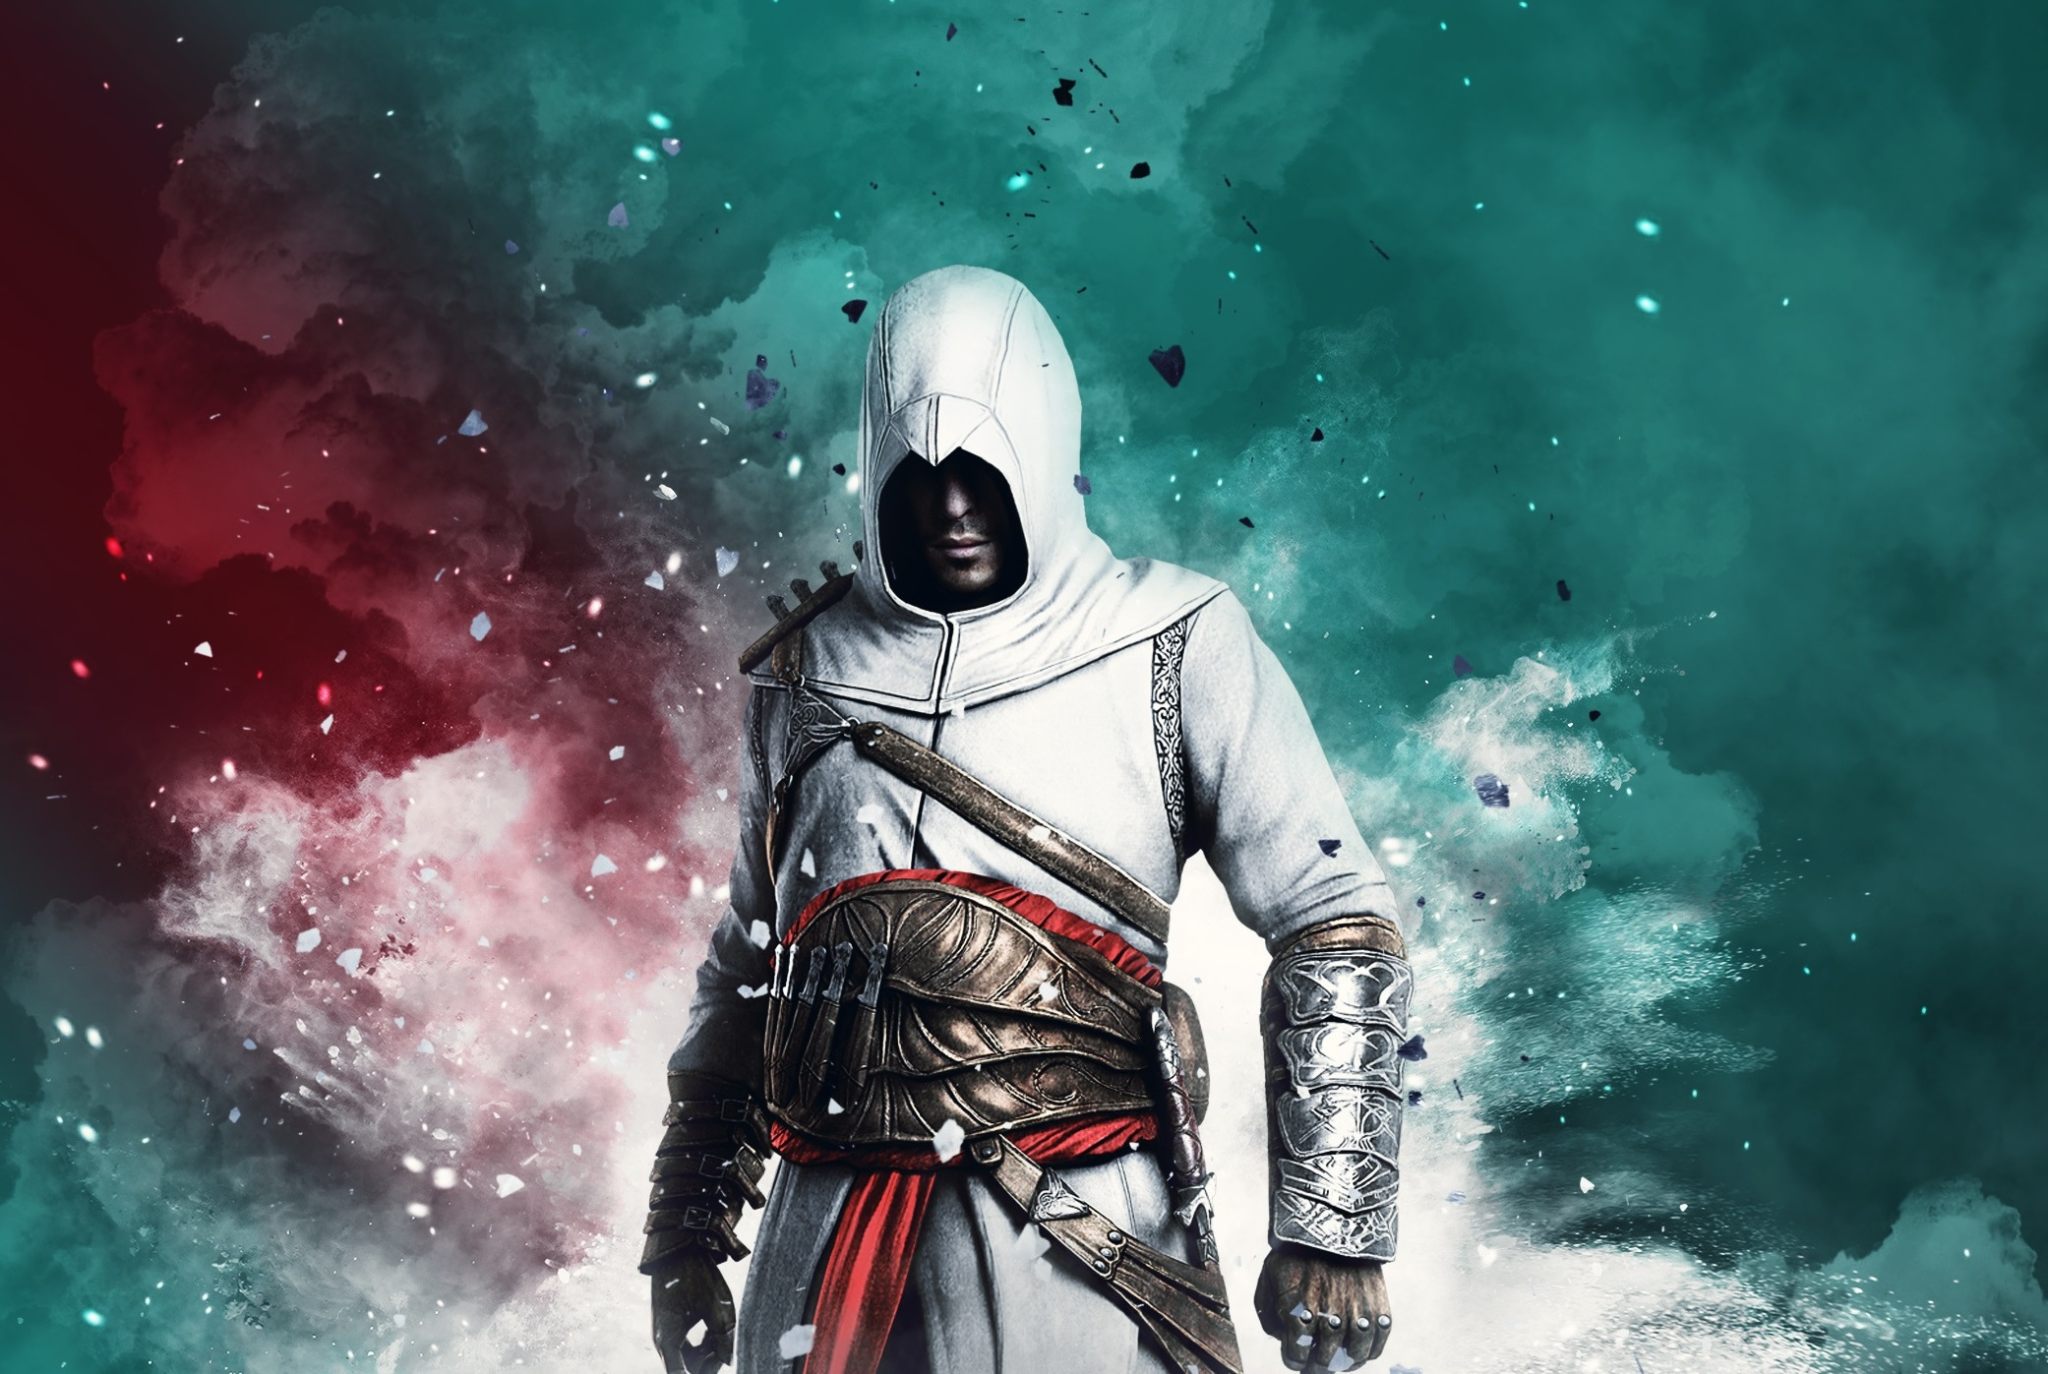 Assassin's Creed videogame